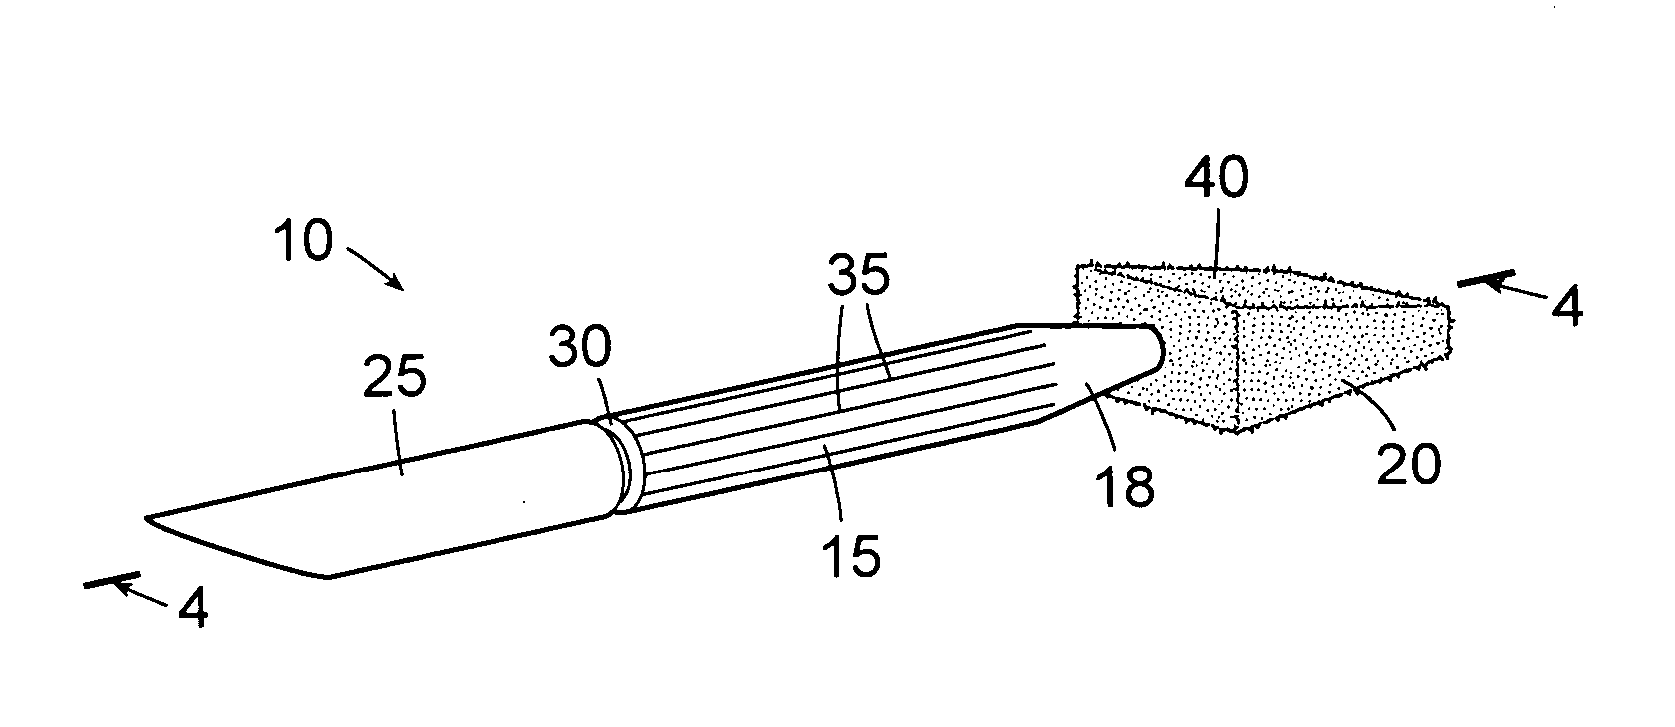 Applicator for cleaning teeth